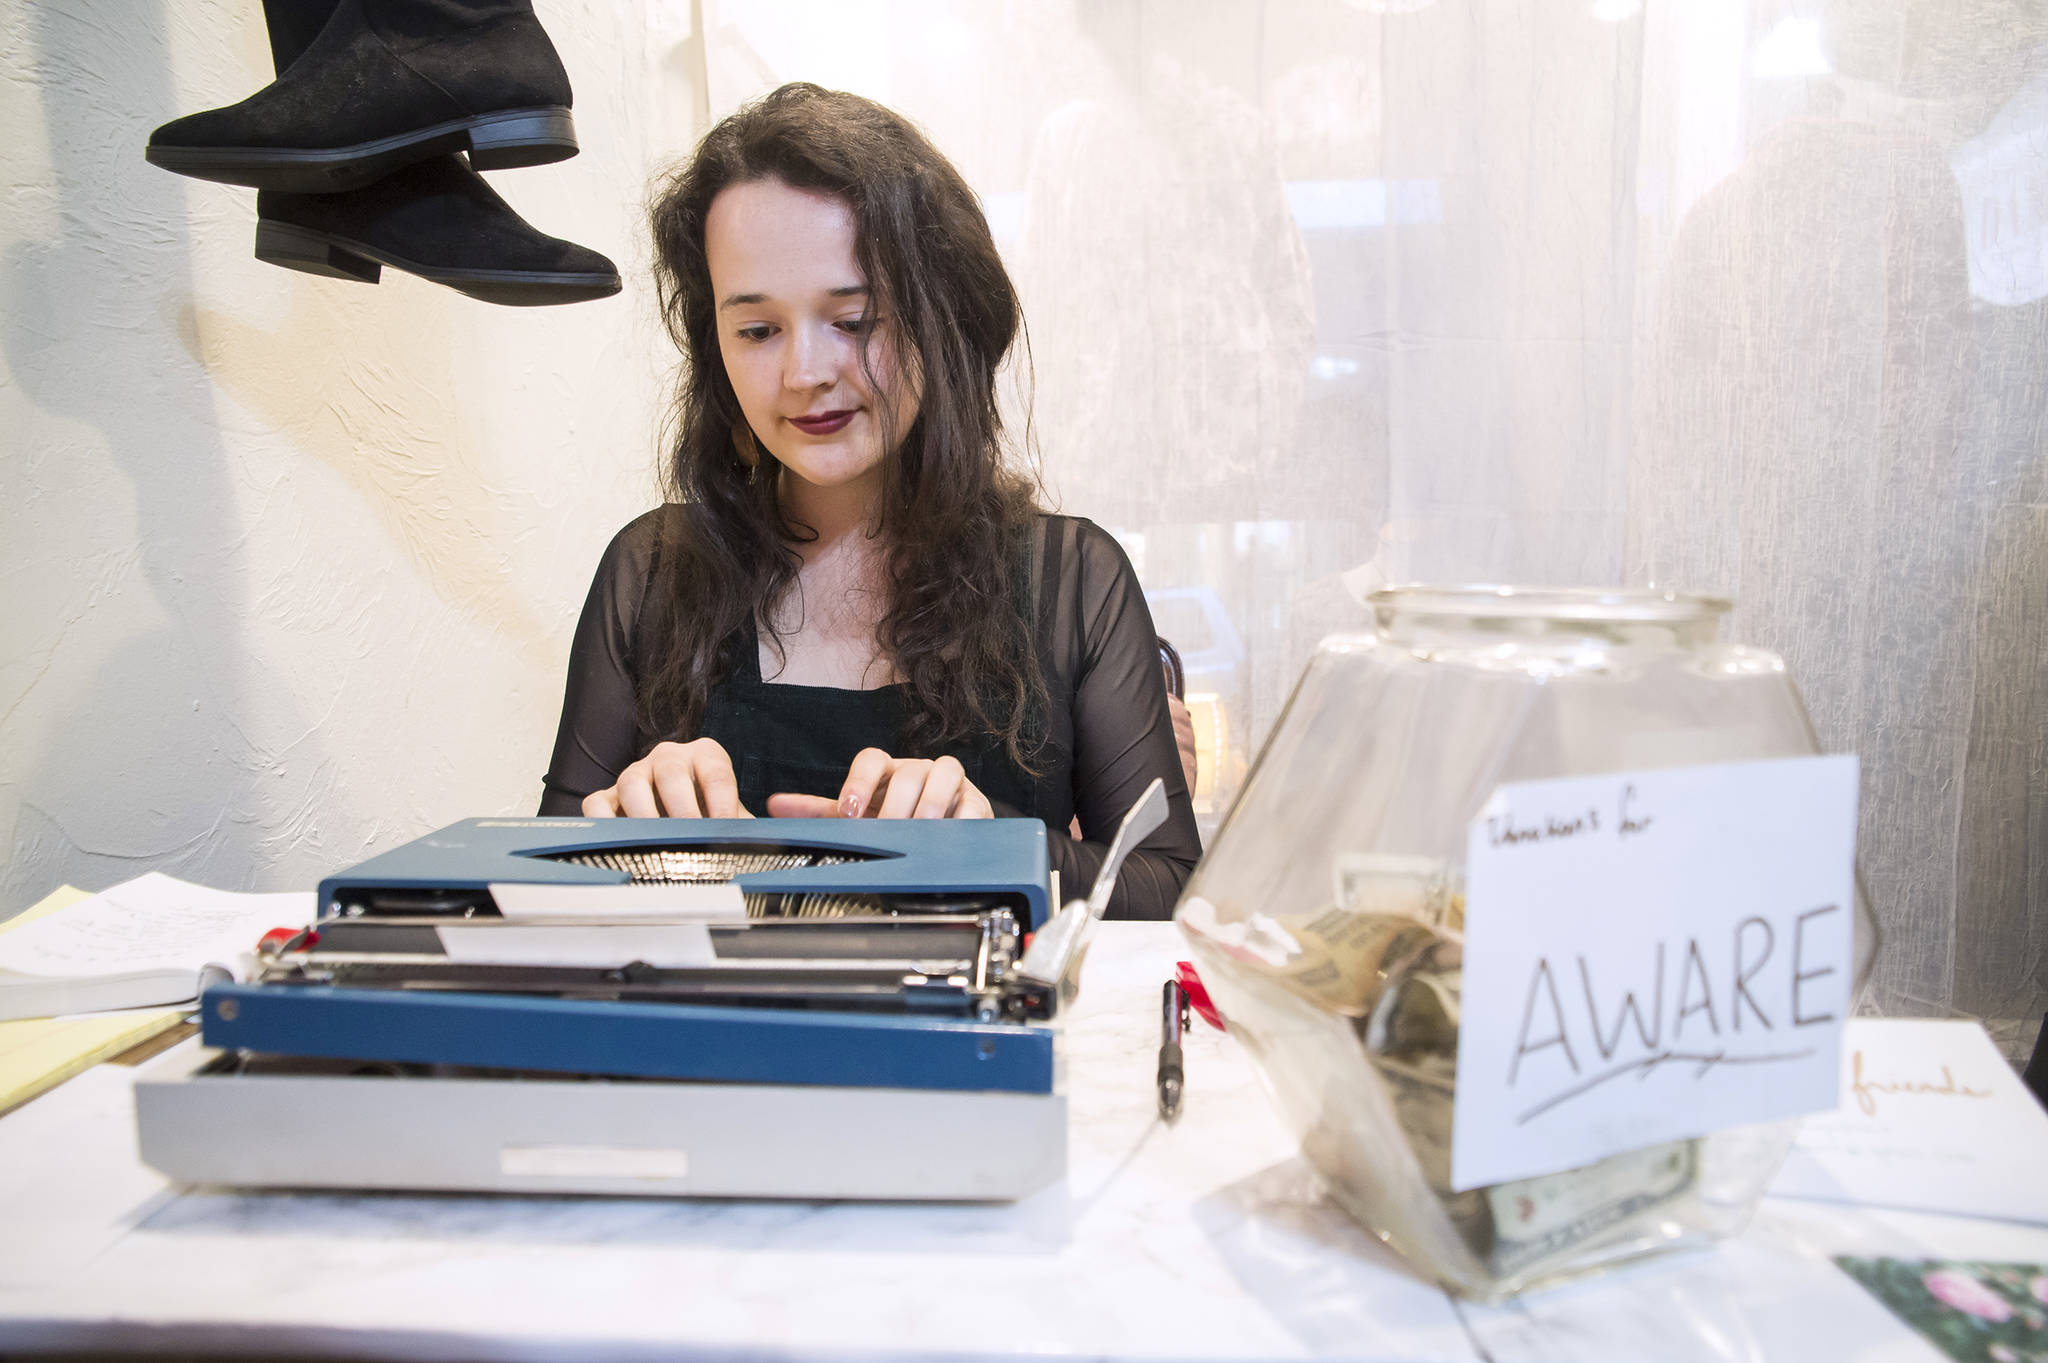 Audrey Kohler types out a poem for a patron at Downtown Dames during First Friday on Friday, Oct. 5, 2018. Kohler’s poems were written on the spot and based on suggestions from strangers. Kohler typed them on her grandmother’s old typewriter, so patrons received a keepsake. (Michael Penn, Juneau Empire)